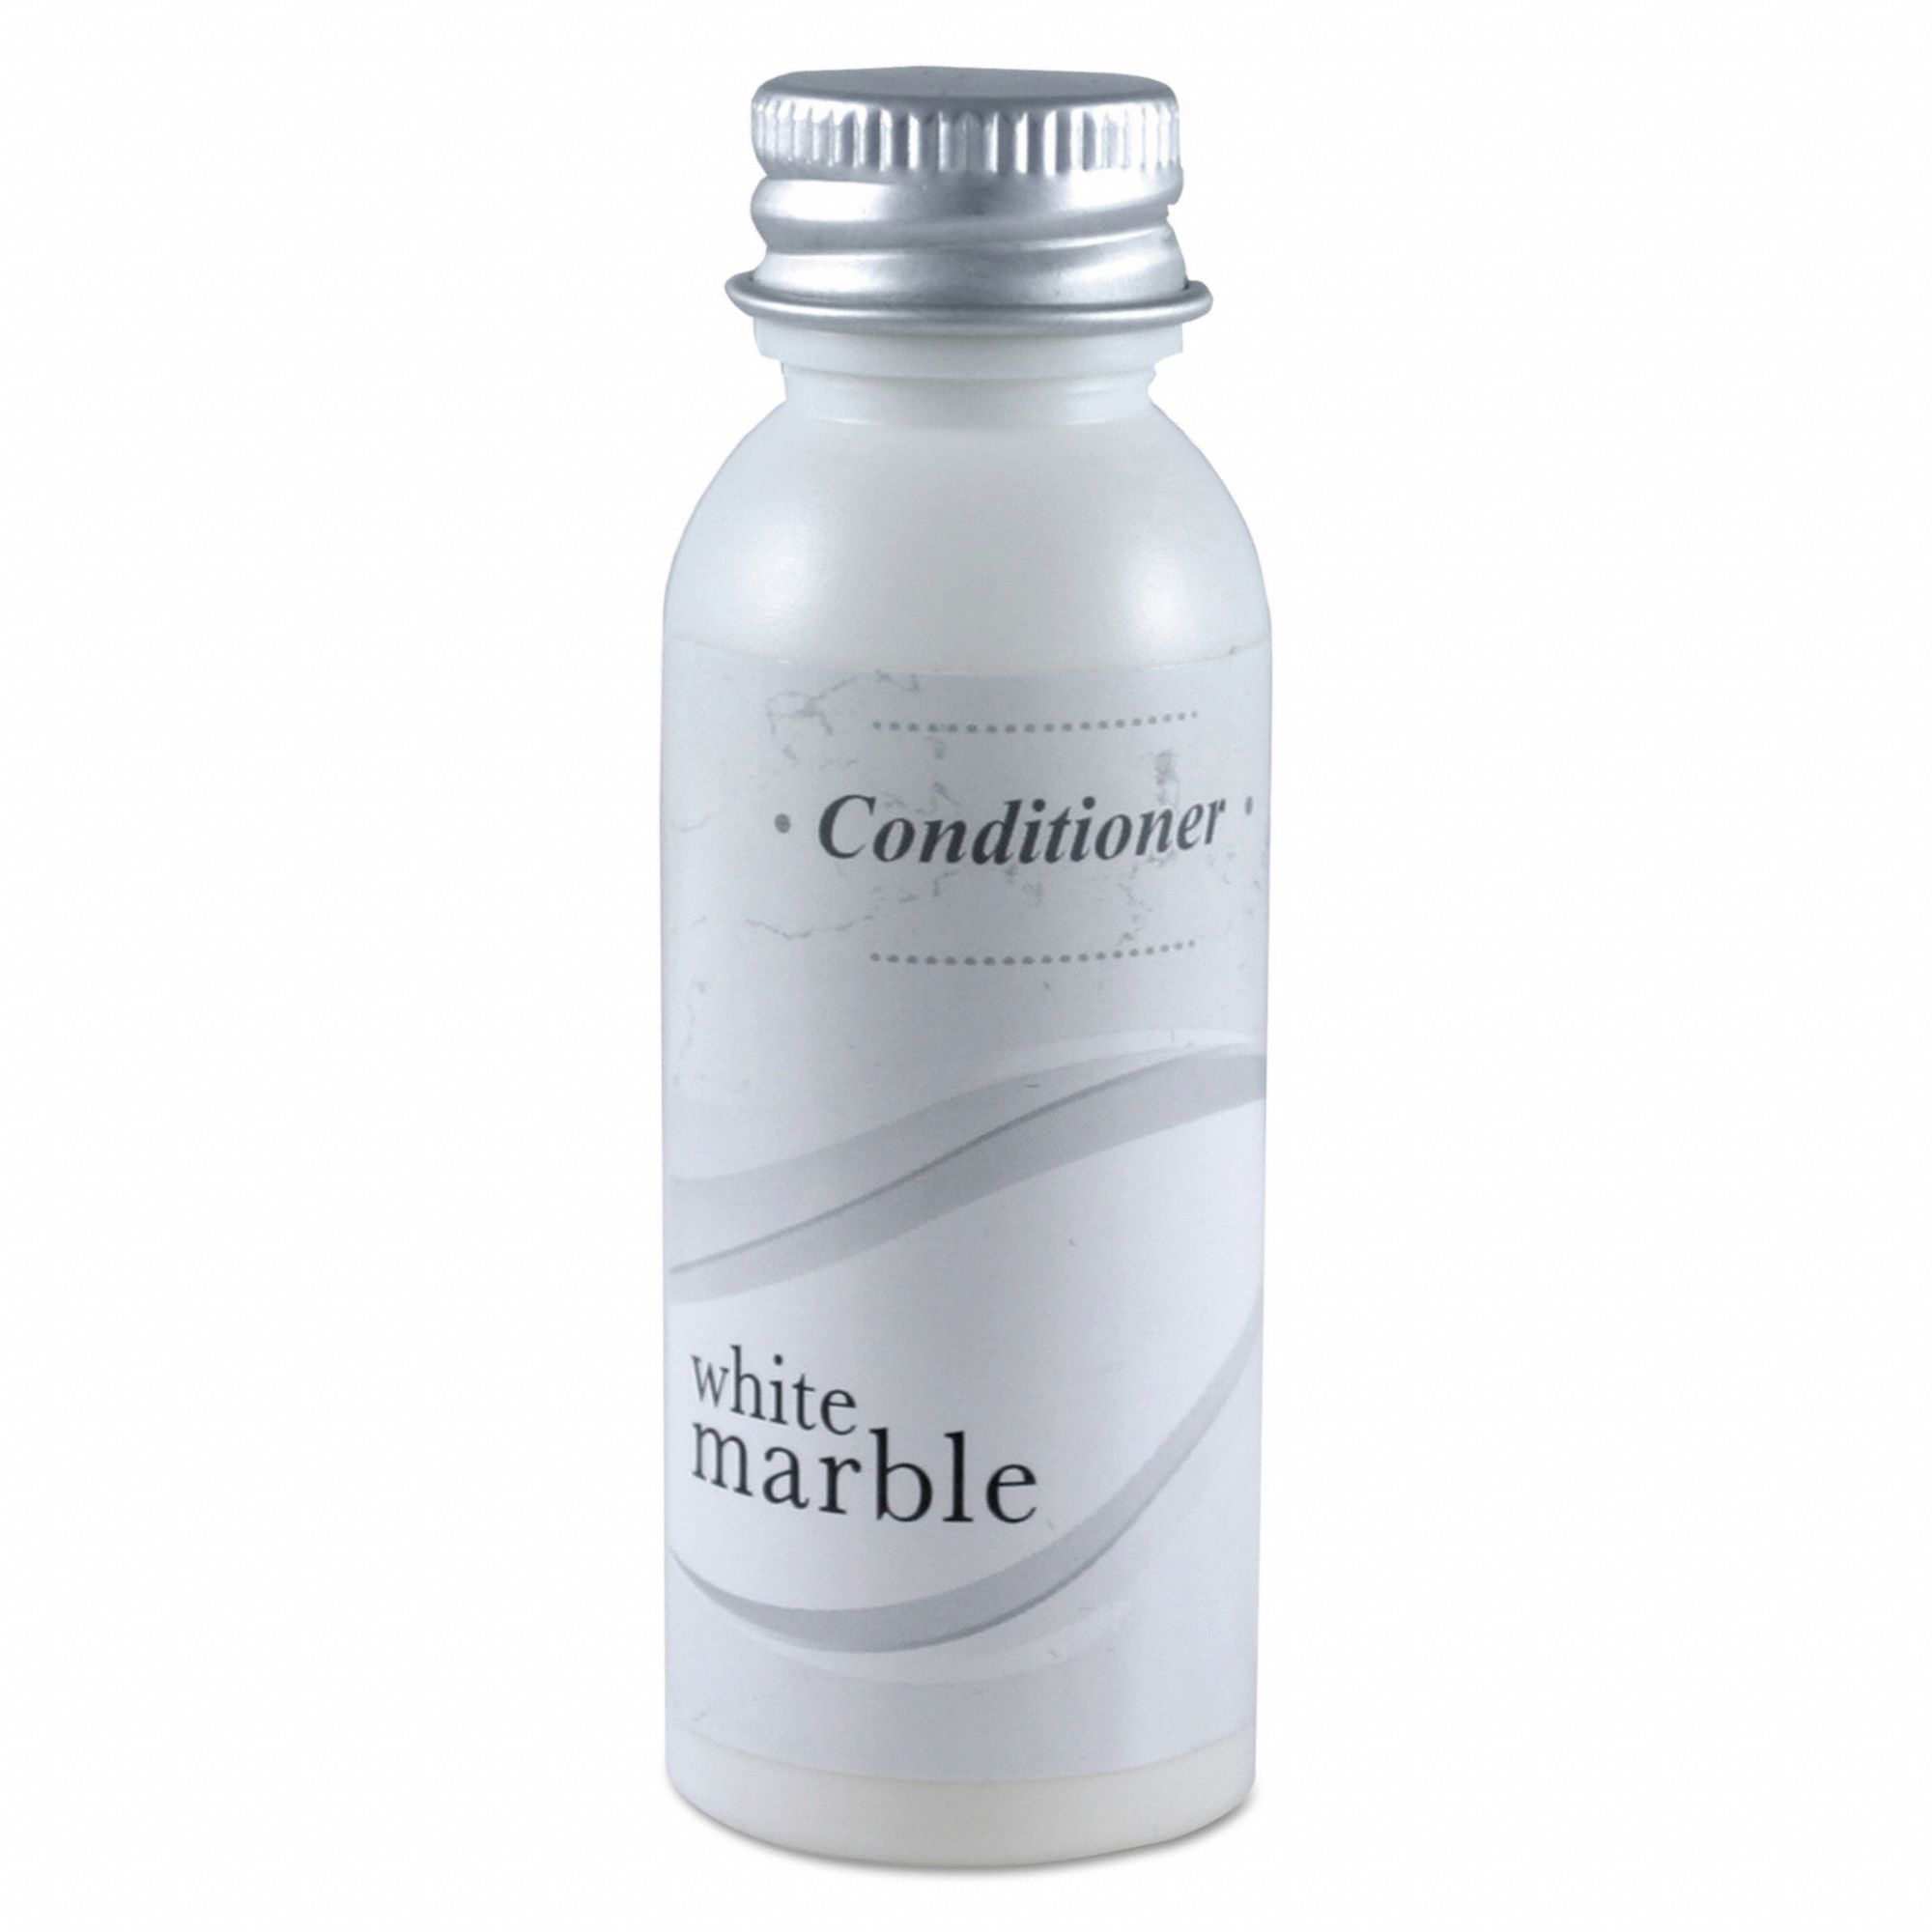 Hair Conditioner: Squeeze Bottle, 0.75 oz Size, Clean, White Marble, 288 PK